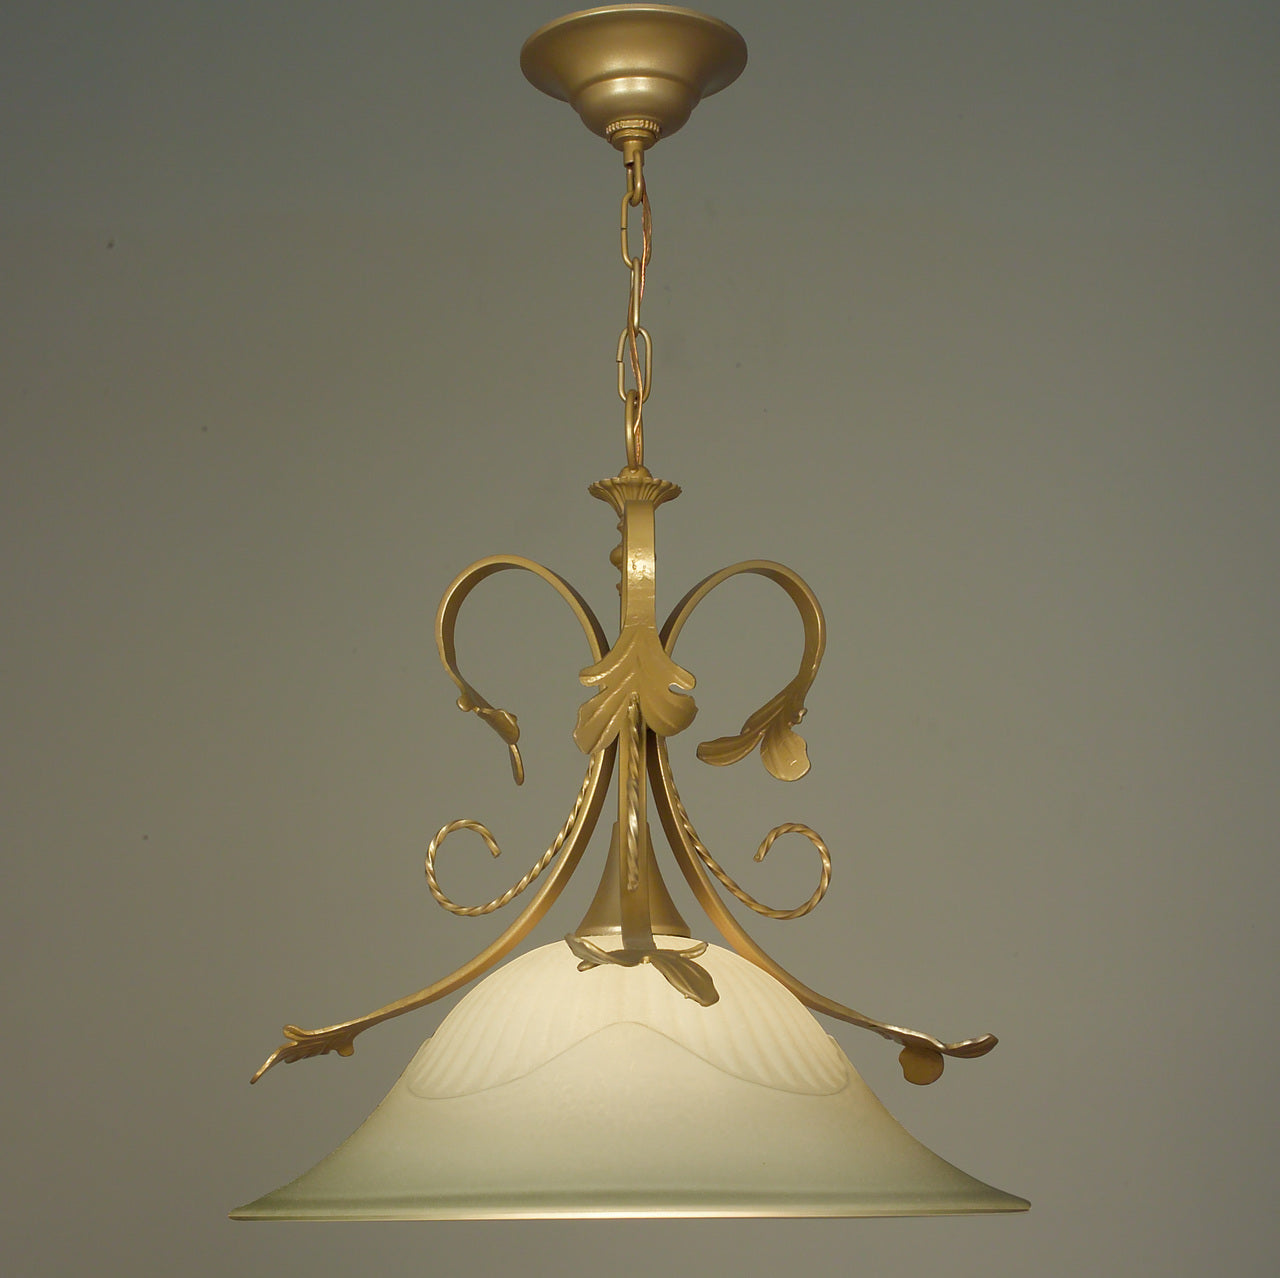 Classic Lighting 4111 PG Treviso Wrought Iron Pendant in Pearlized Gold (Imported from Italy)